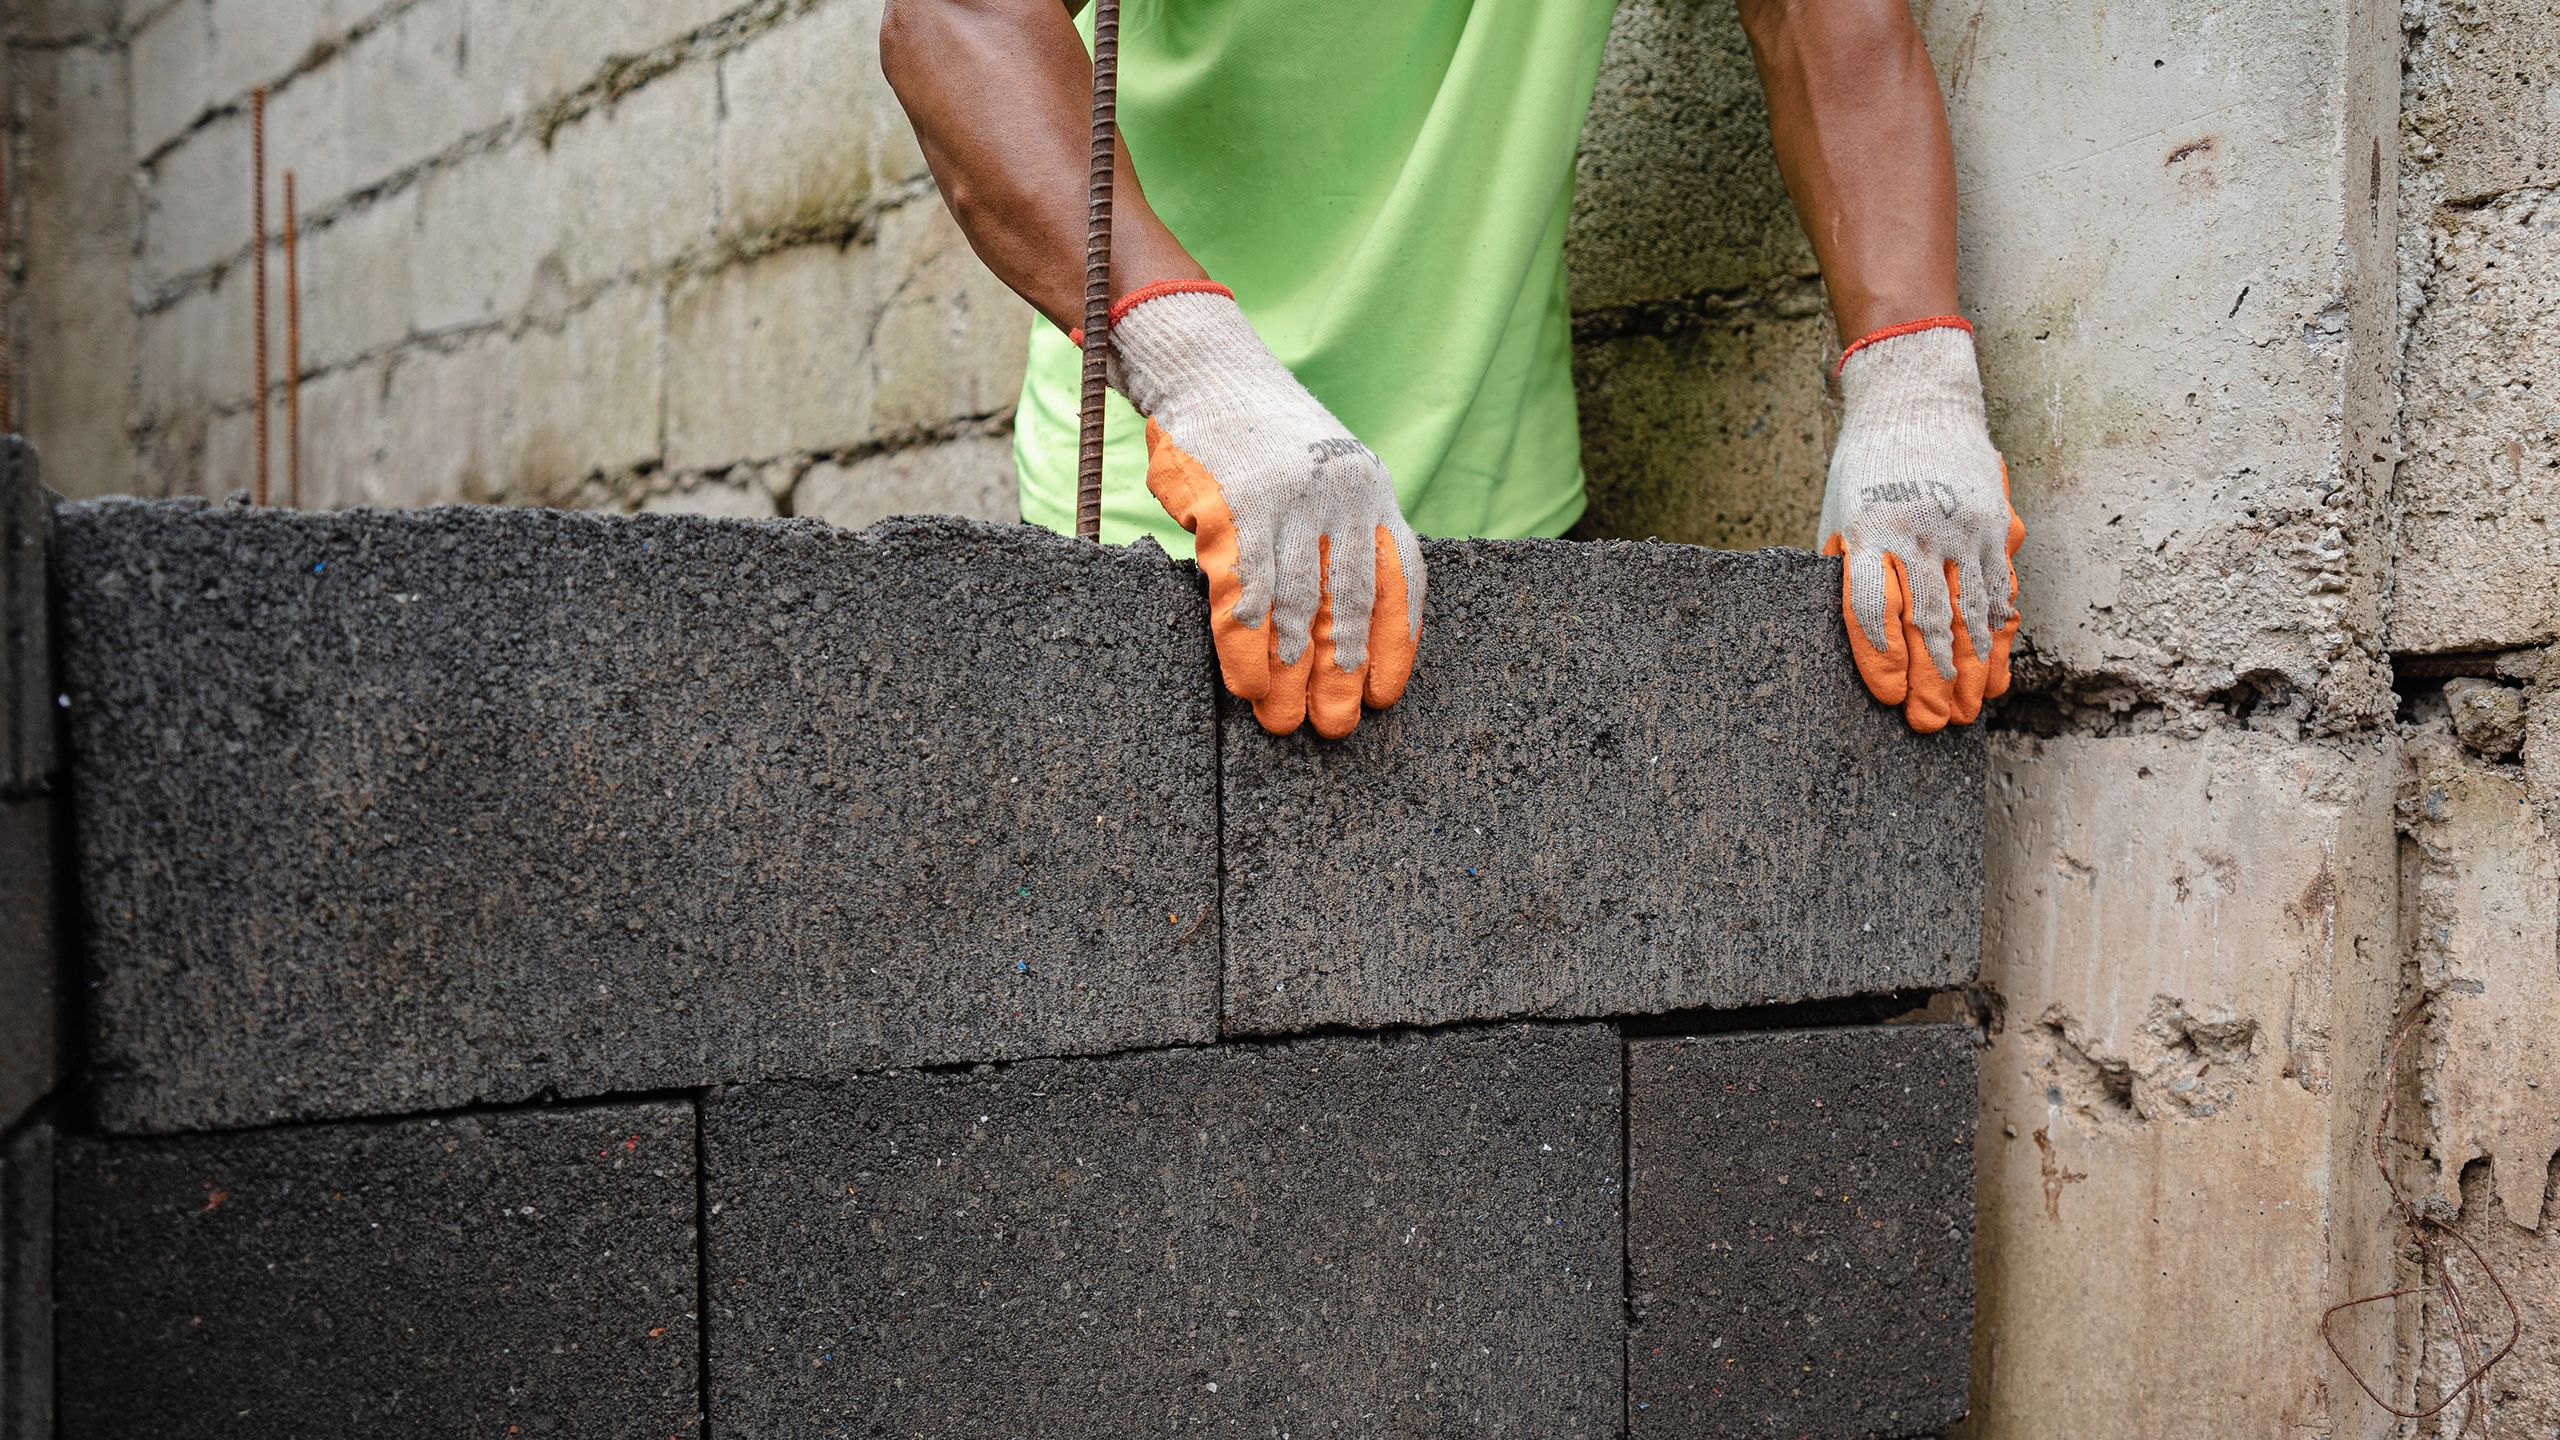 A person with bright orange gloves places a concrete block on a growing wall at the corner.